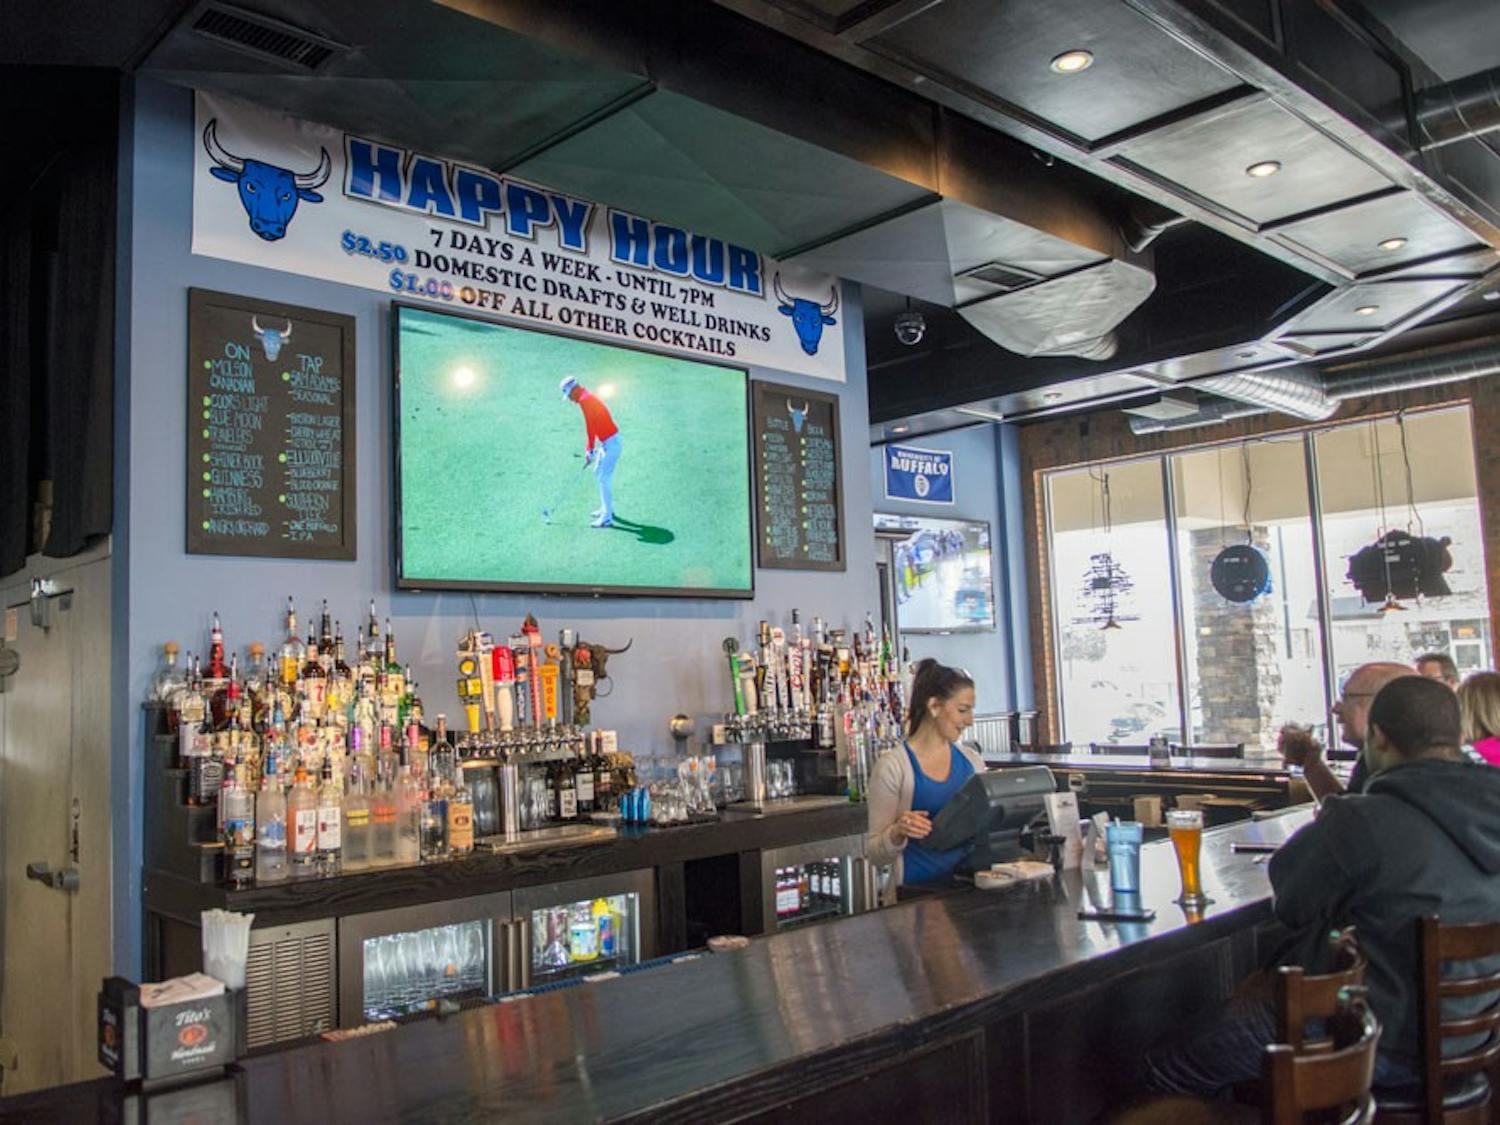 The Blue Bull Tavern, located at 1300 Sweet Home Road, brings a mixture of UB students, parents and children to the place that specializes in gourmet food and craft beer.&nbsp;